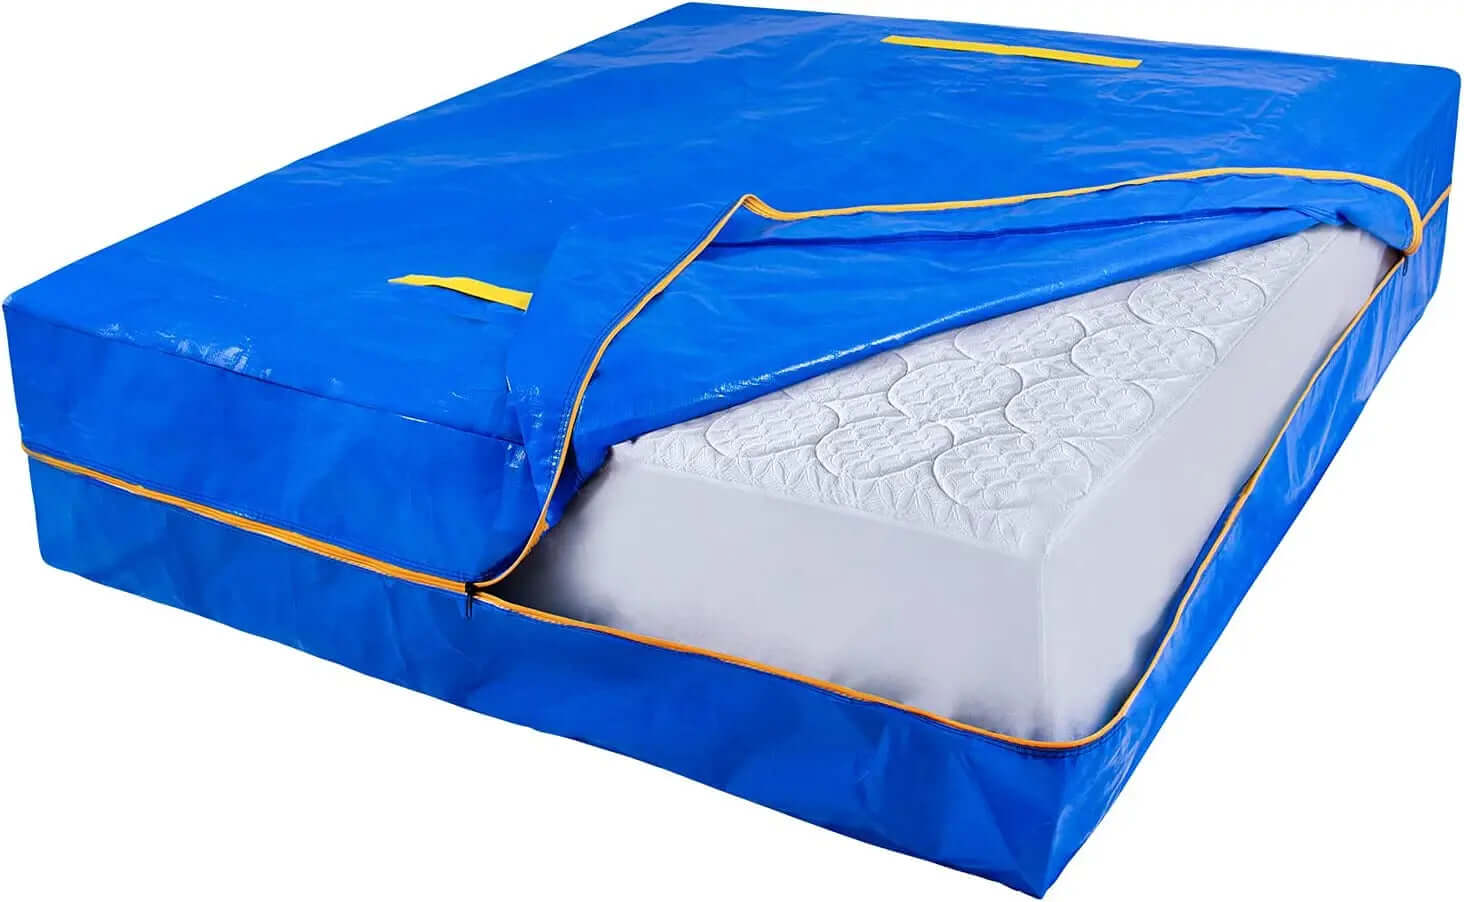 Heavy Duty Tarp Mattress Bag | Storage Bags and Covers | Packstore